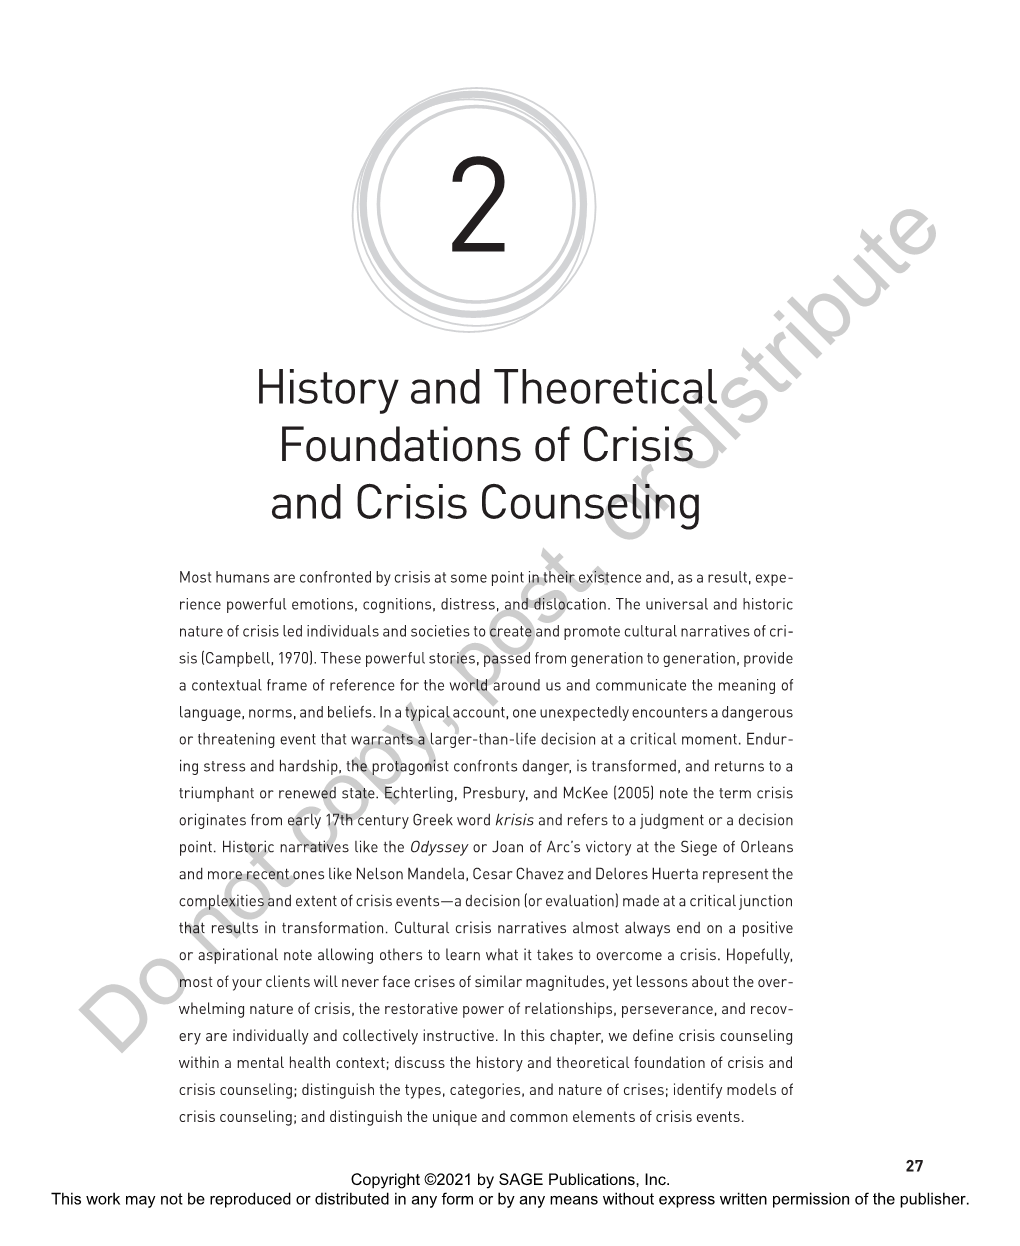 History and Theoretical Foundations of Crisis and Crisis Counseling 29